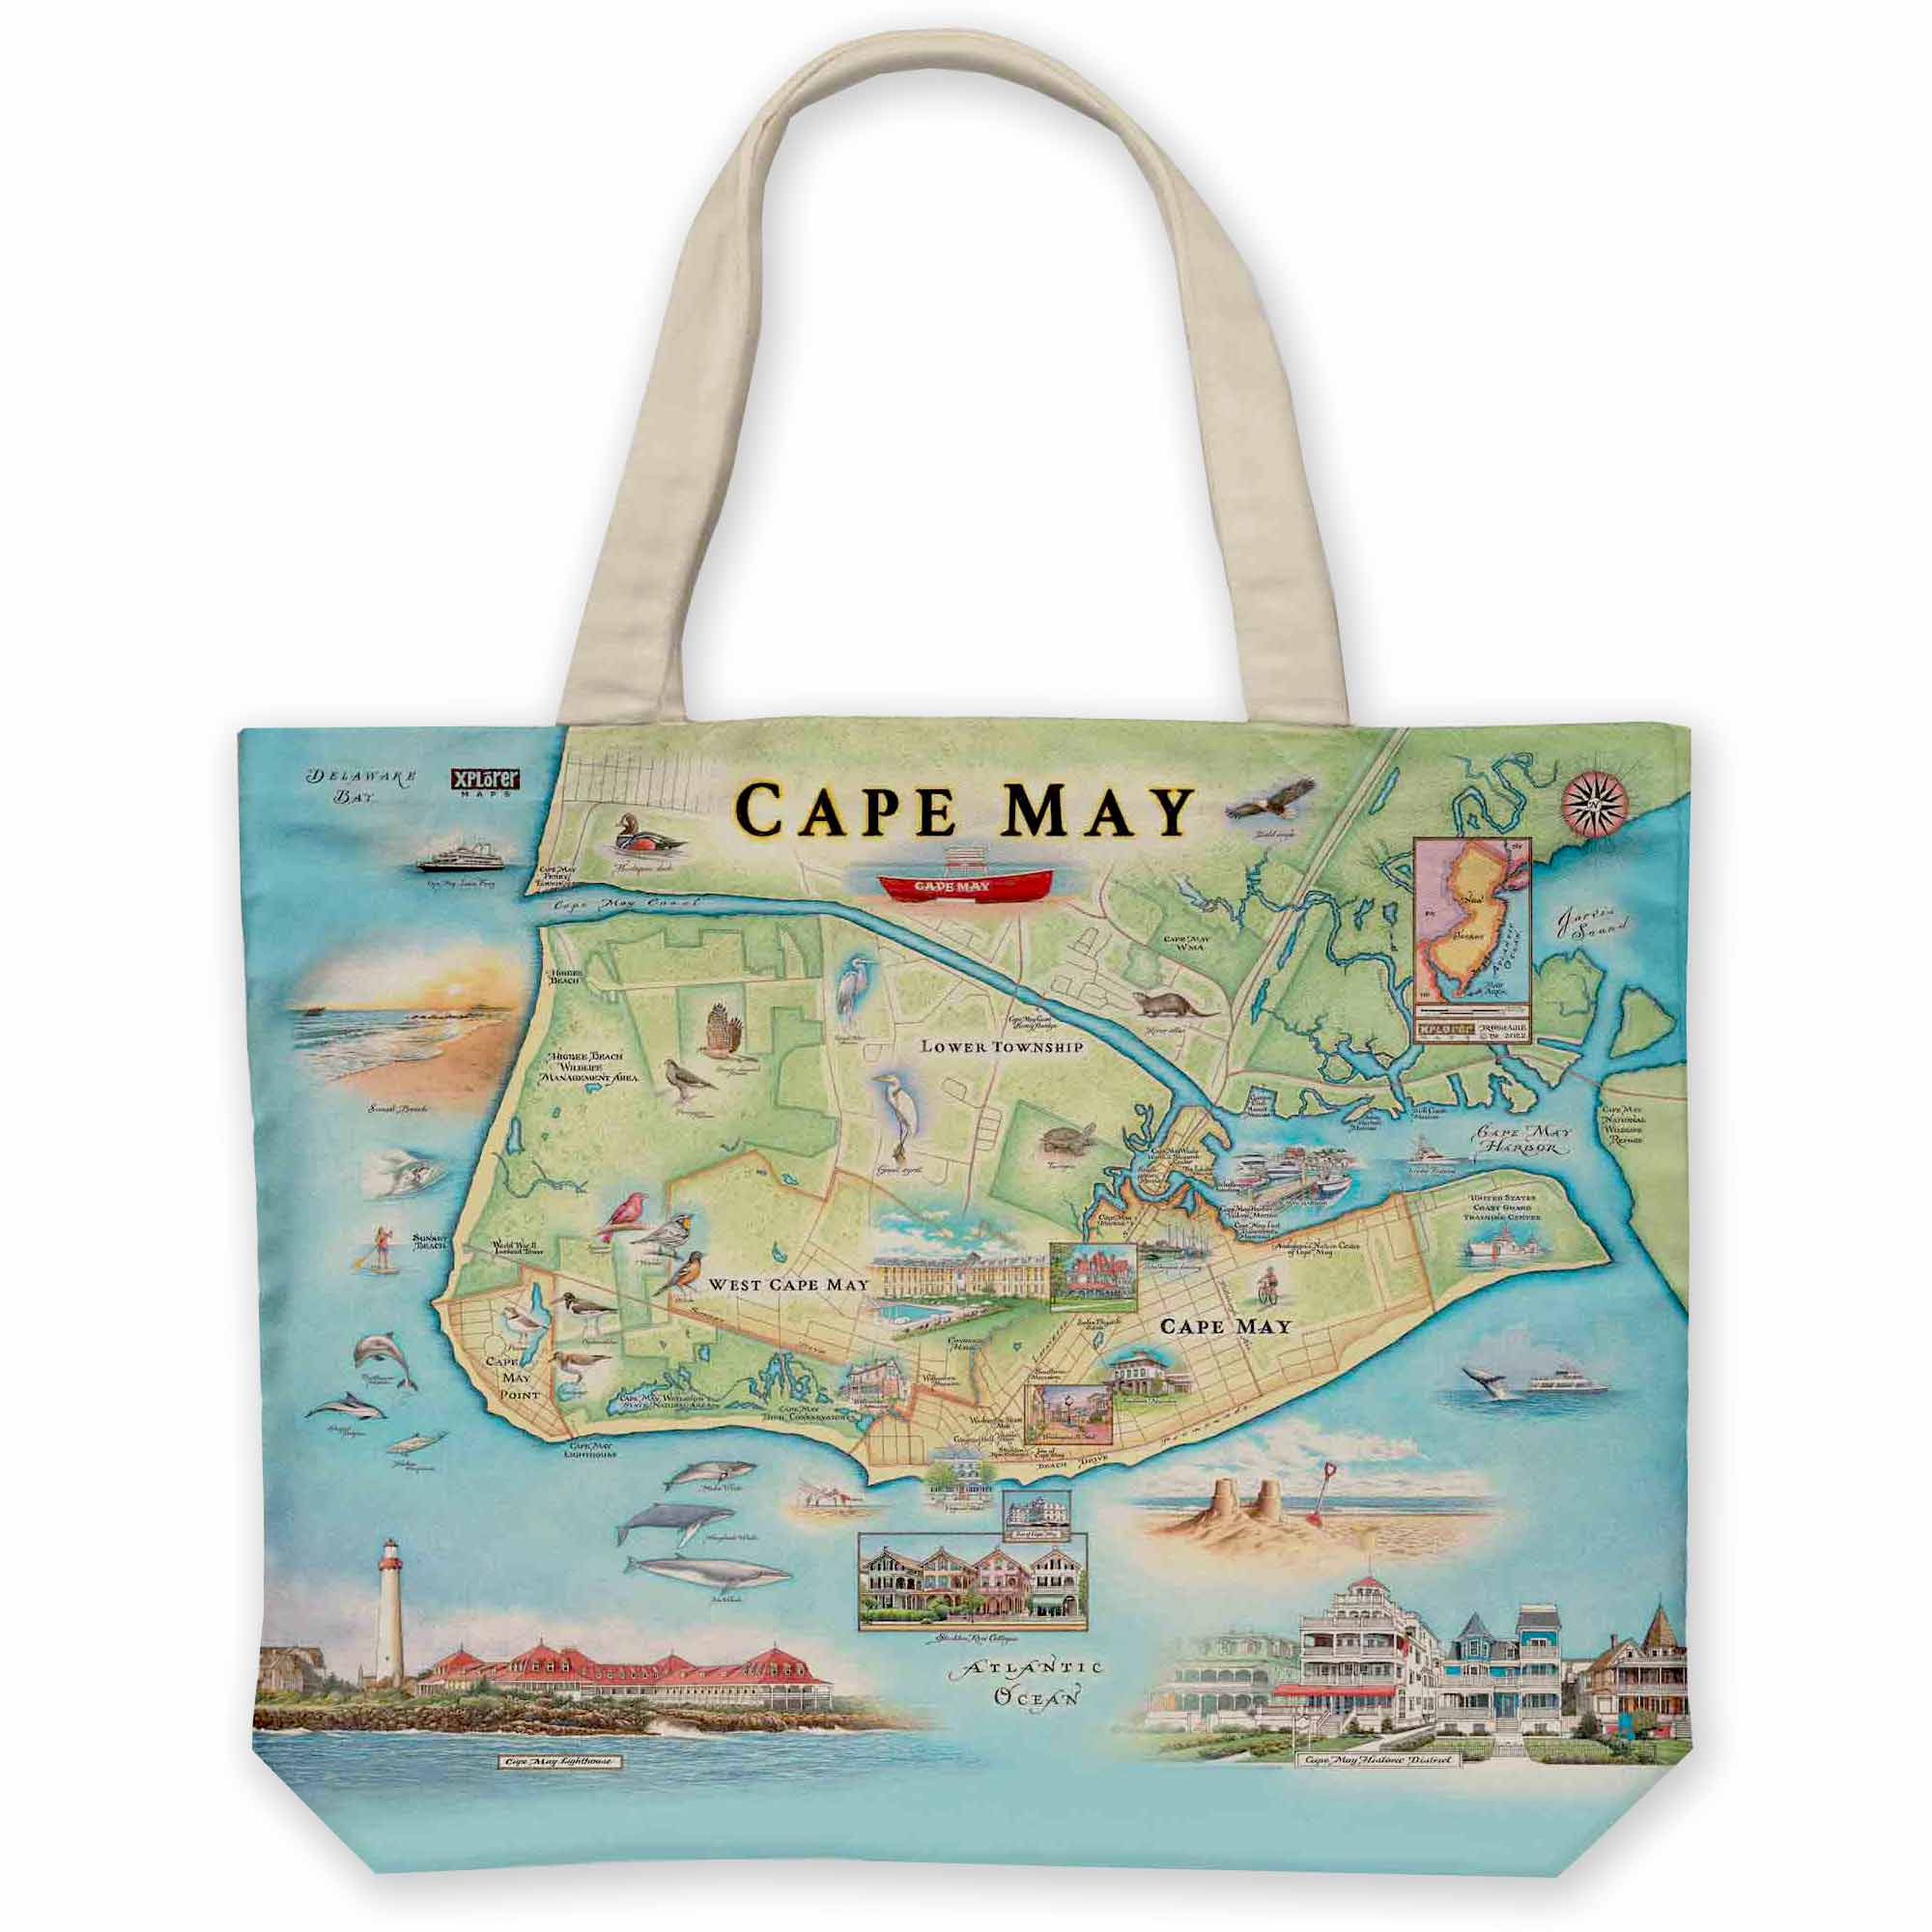 New Jersey's Cape May Map Canvas tote bag in earth tones of blue and green. The map features heron and whale species. Map features Cape May, Lower Township, and West Cape May. Cape May Harbor, Congress Hall, Washington St. Mall, and Cape May Bird Observatory.